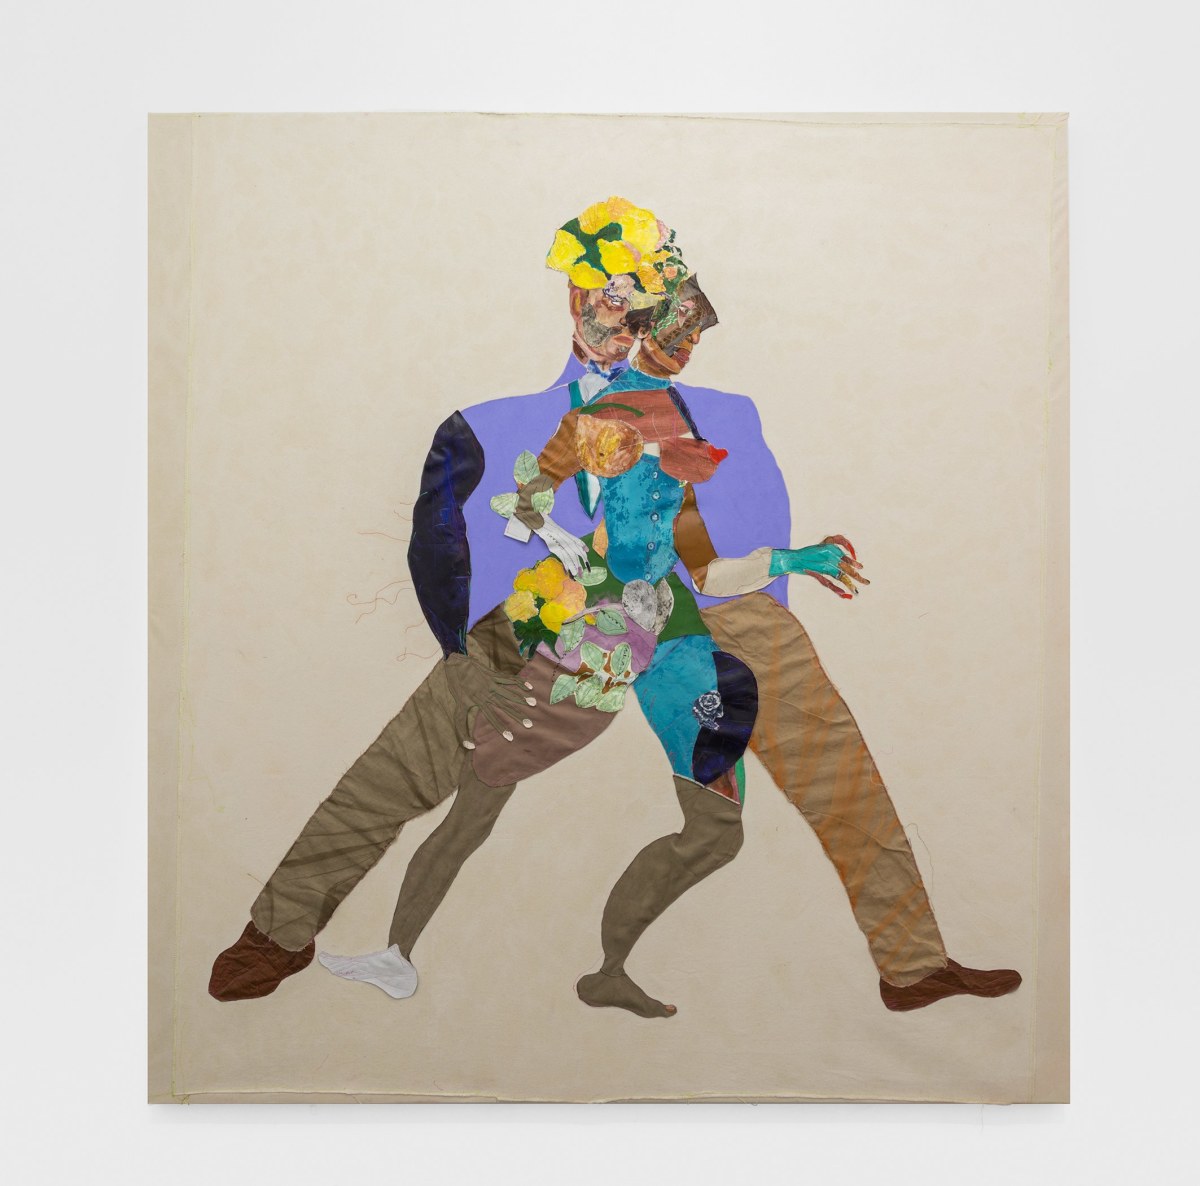 The print relates to this painting:

TSCHABALALA SELF

Mista &amp;amp; Mrs.

2016

Linen, fabric, paper, oil, acrylic, and Flashe on canvas

244 x 228.5 cm / 96 x 90 in

SELF 46793